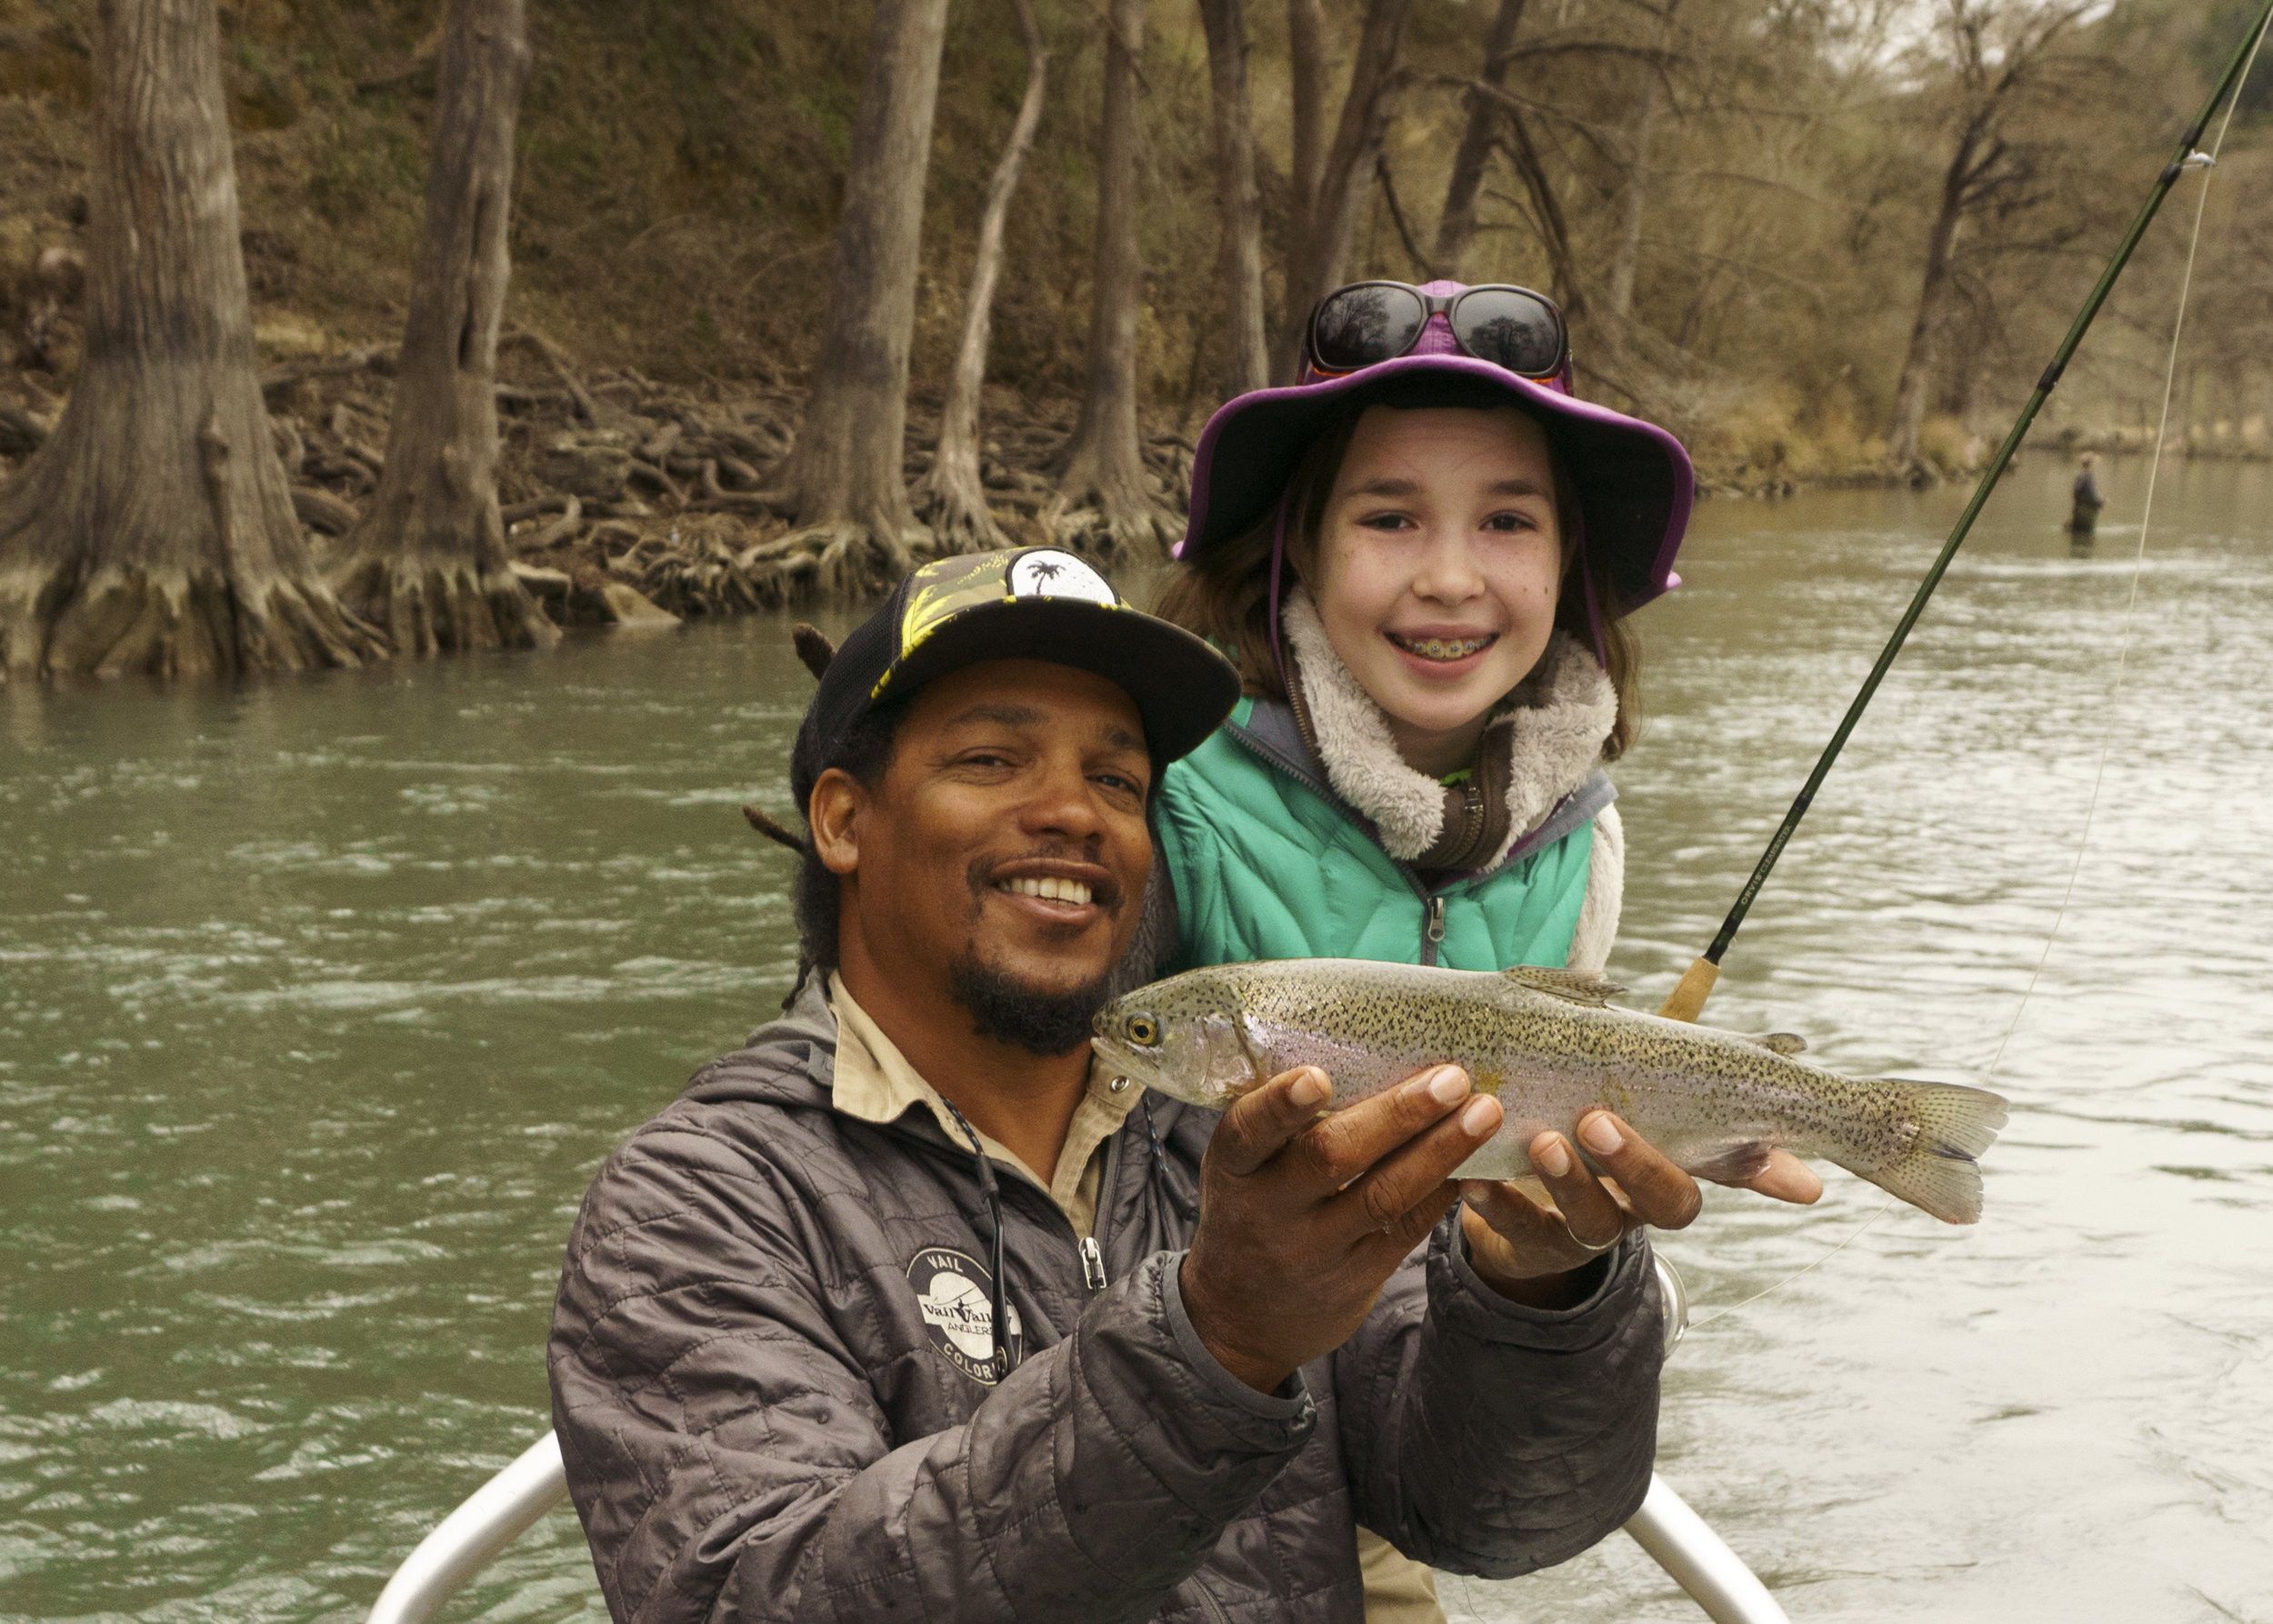 TPWD trout stocking program keeps anglers busy all winter long